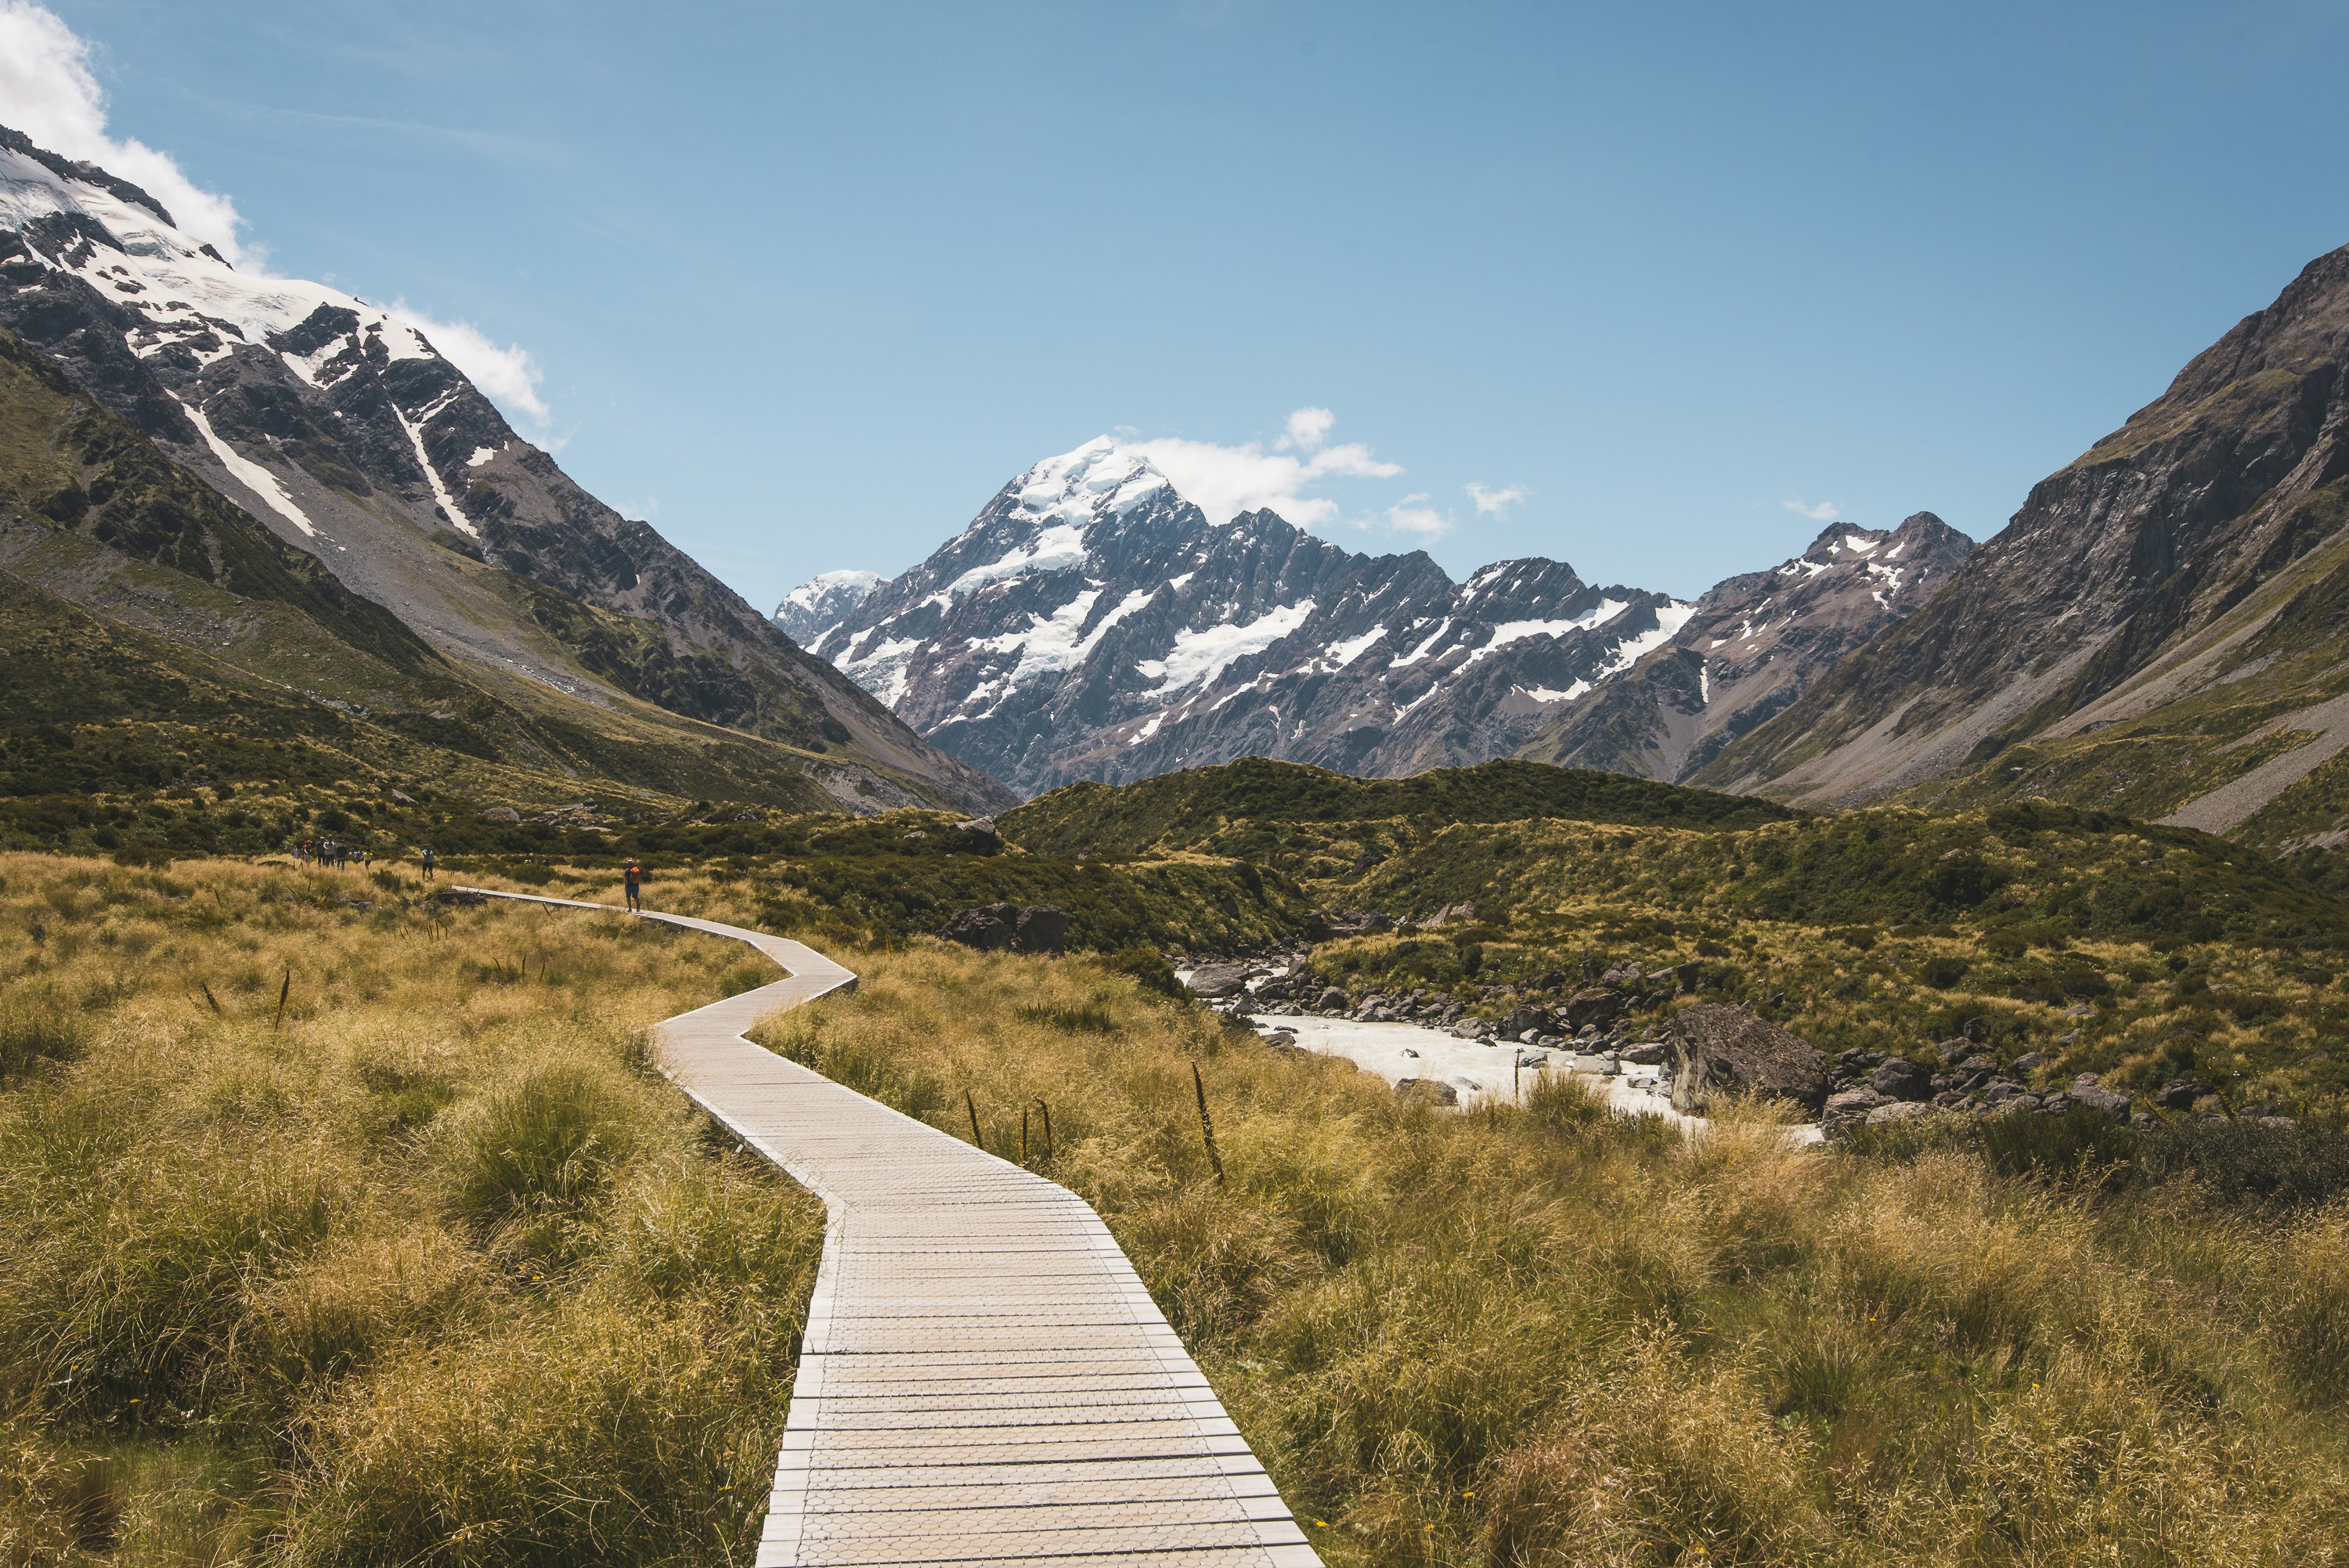 This picture is made in New Zealand at the Hooker Valley Track on the South Island.